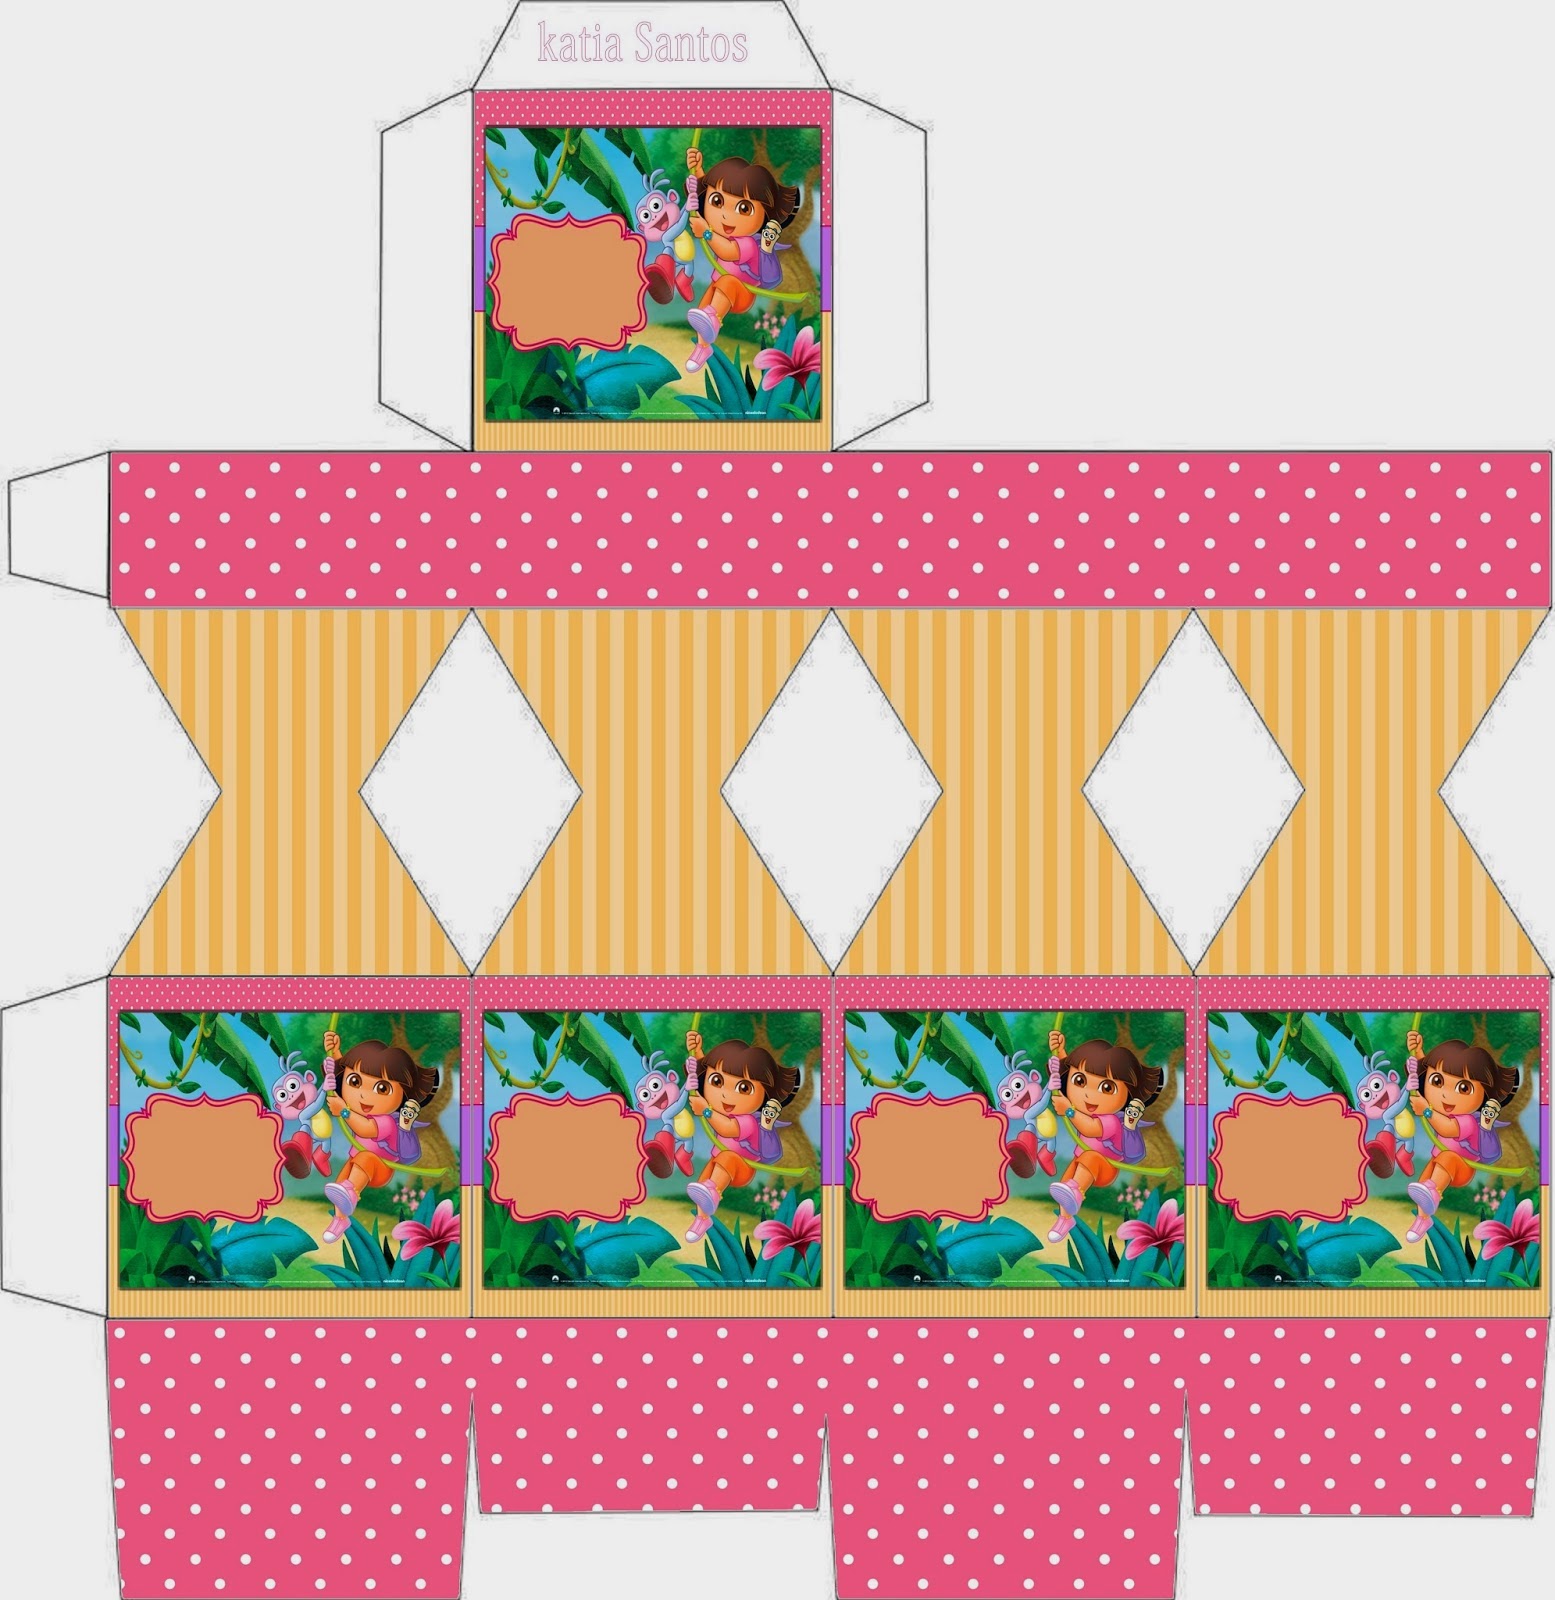 dora-the-explorer-free-printable-invitations-boxes-and-party